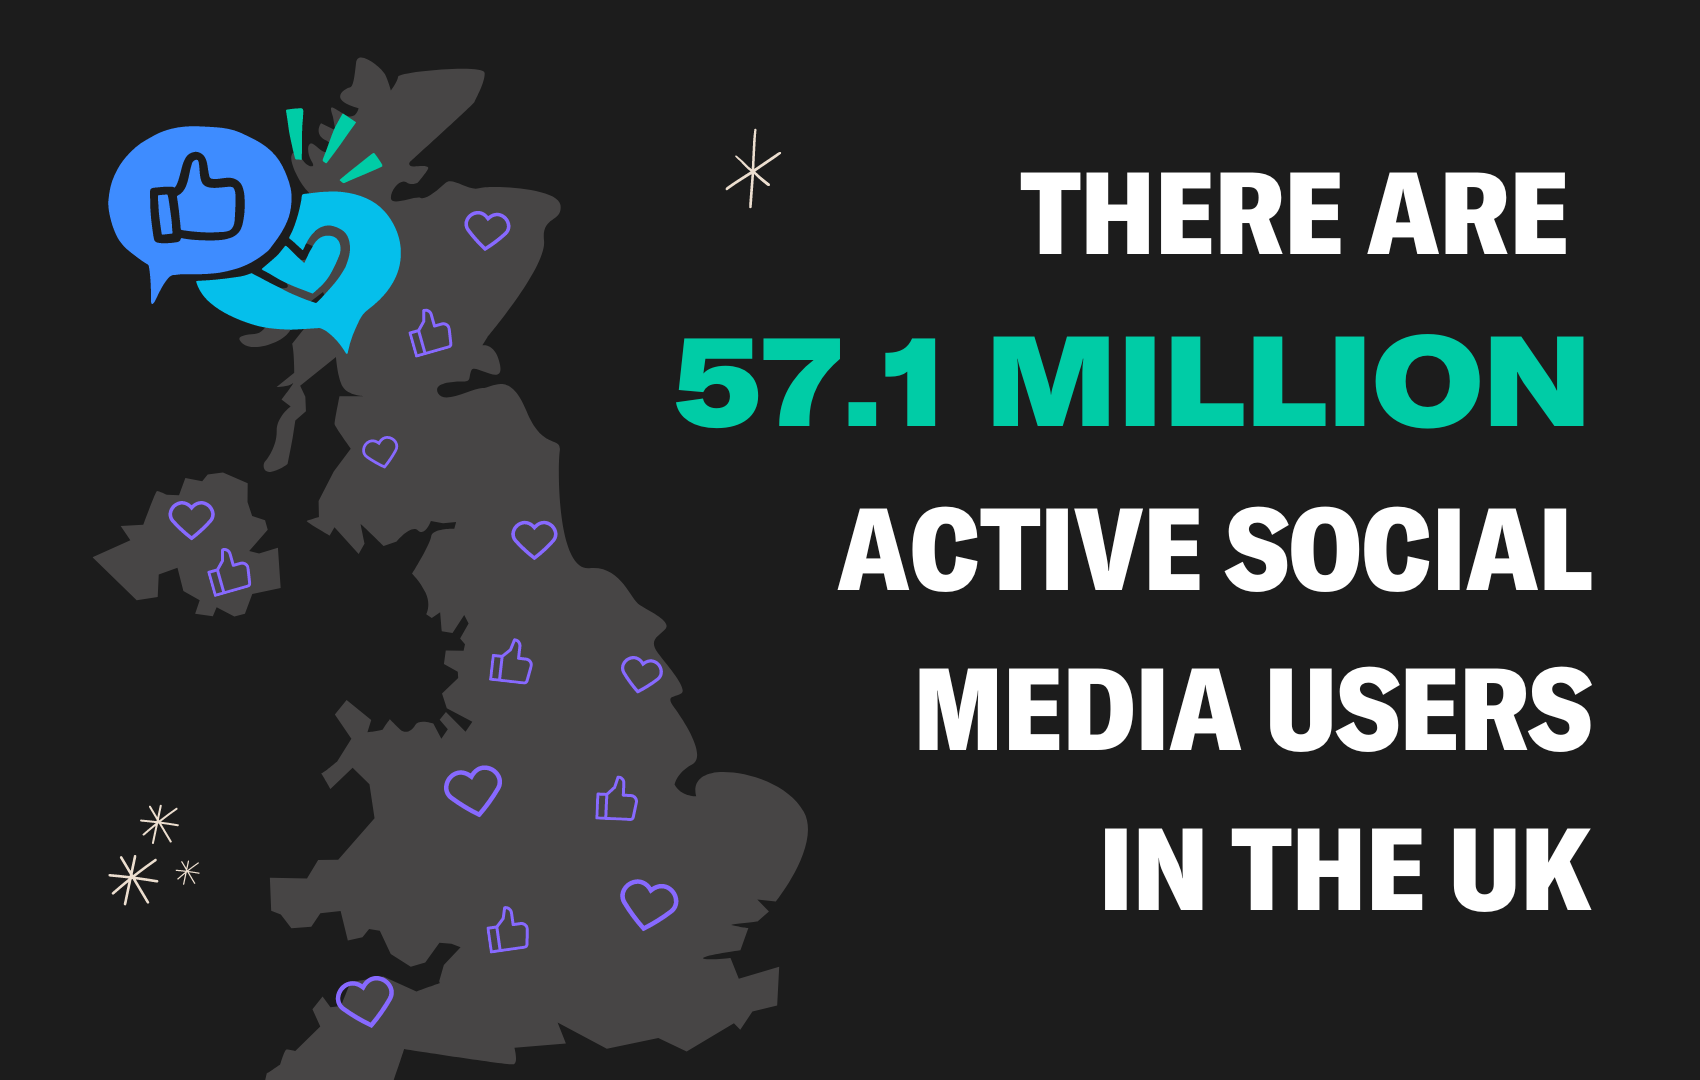 There are 57.1 million active social media users in the UK